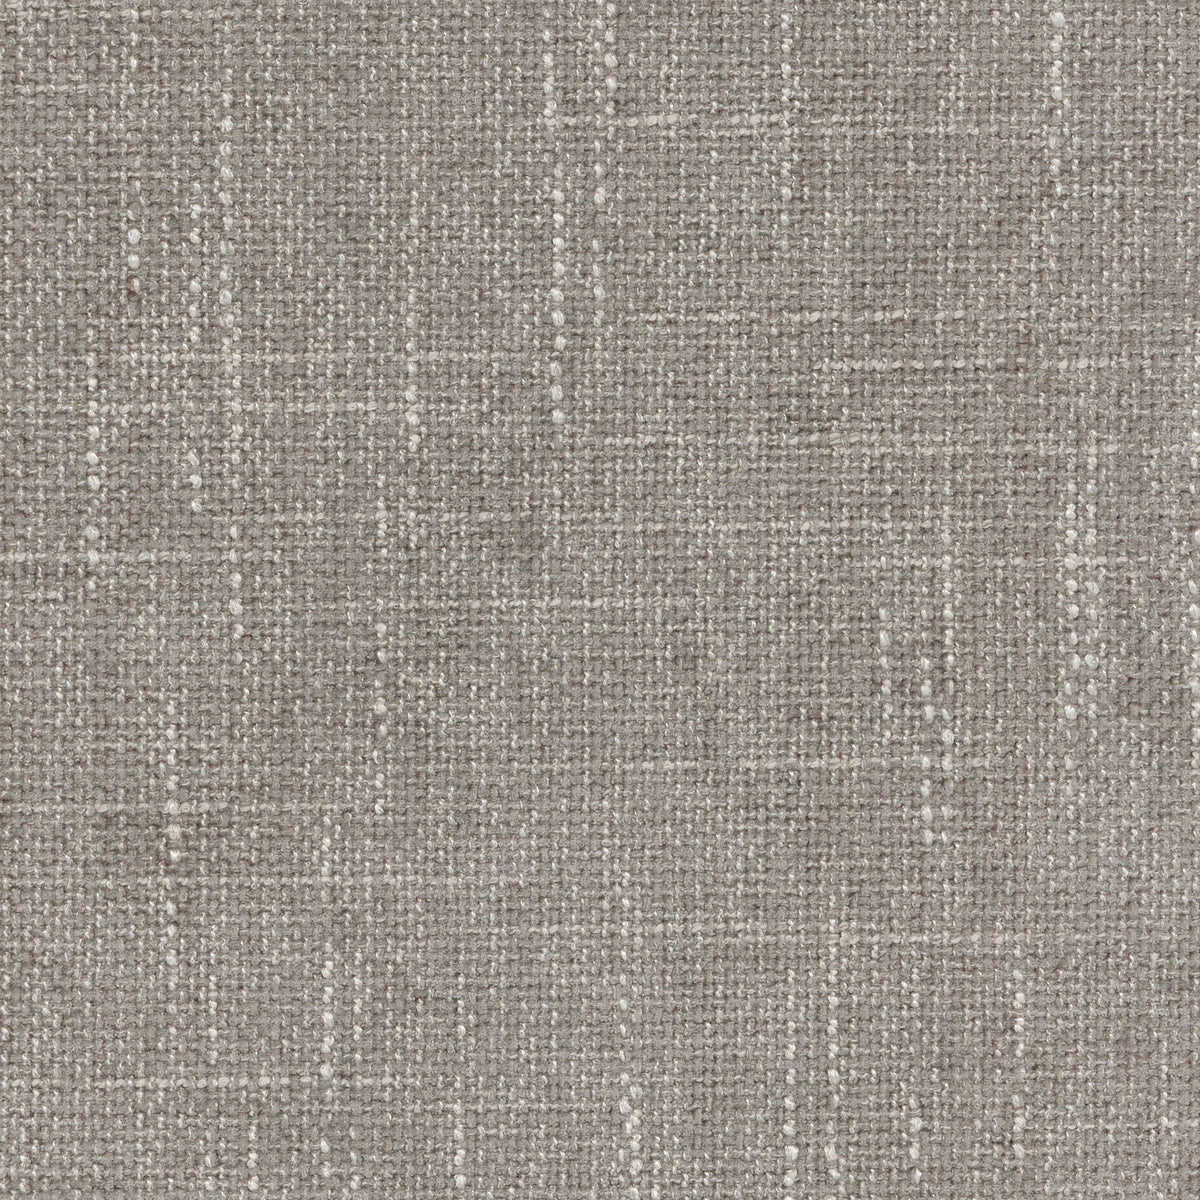 P/K Lifestyles Mixology - Sterling 404381 Fabric Swatch